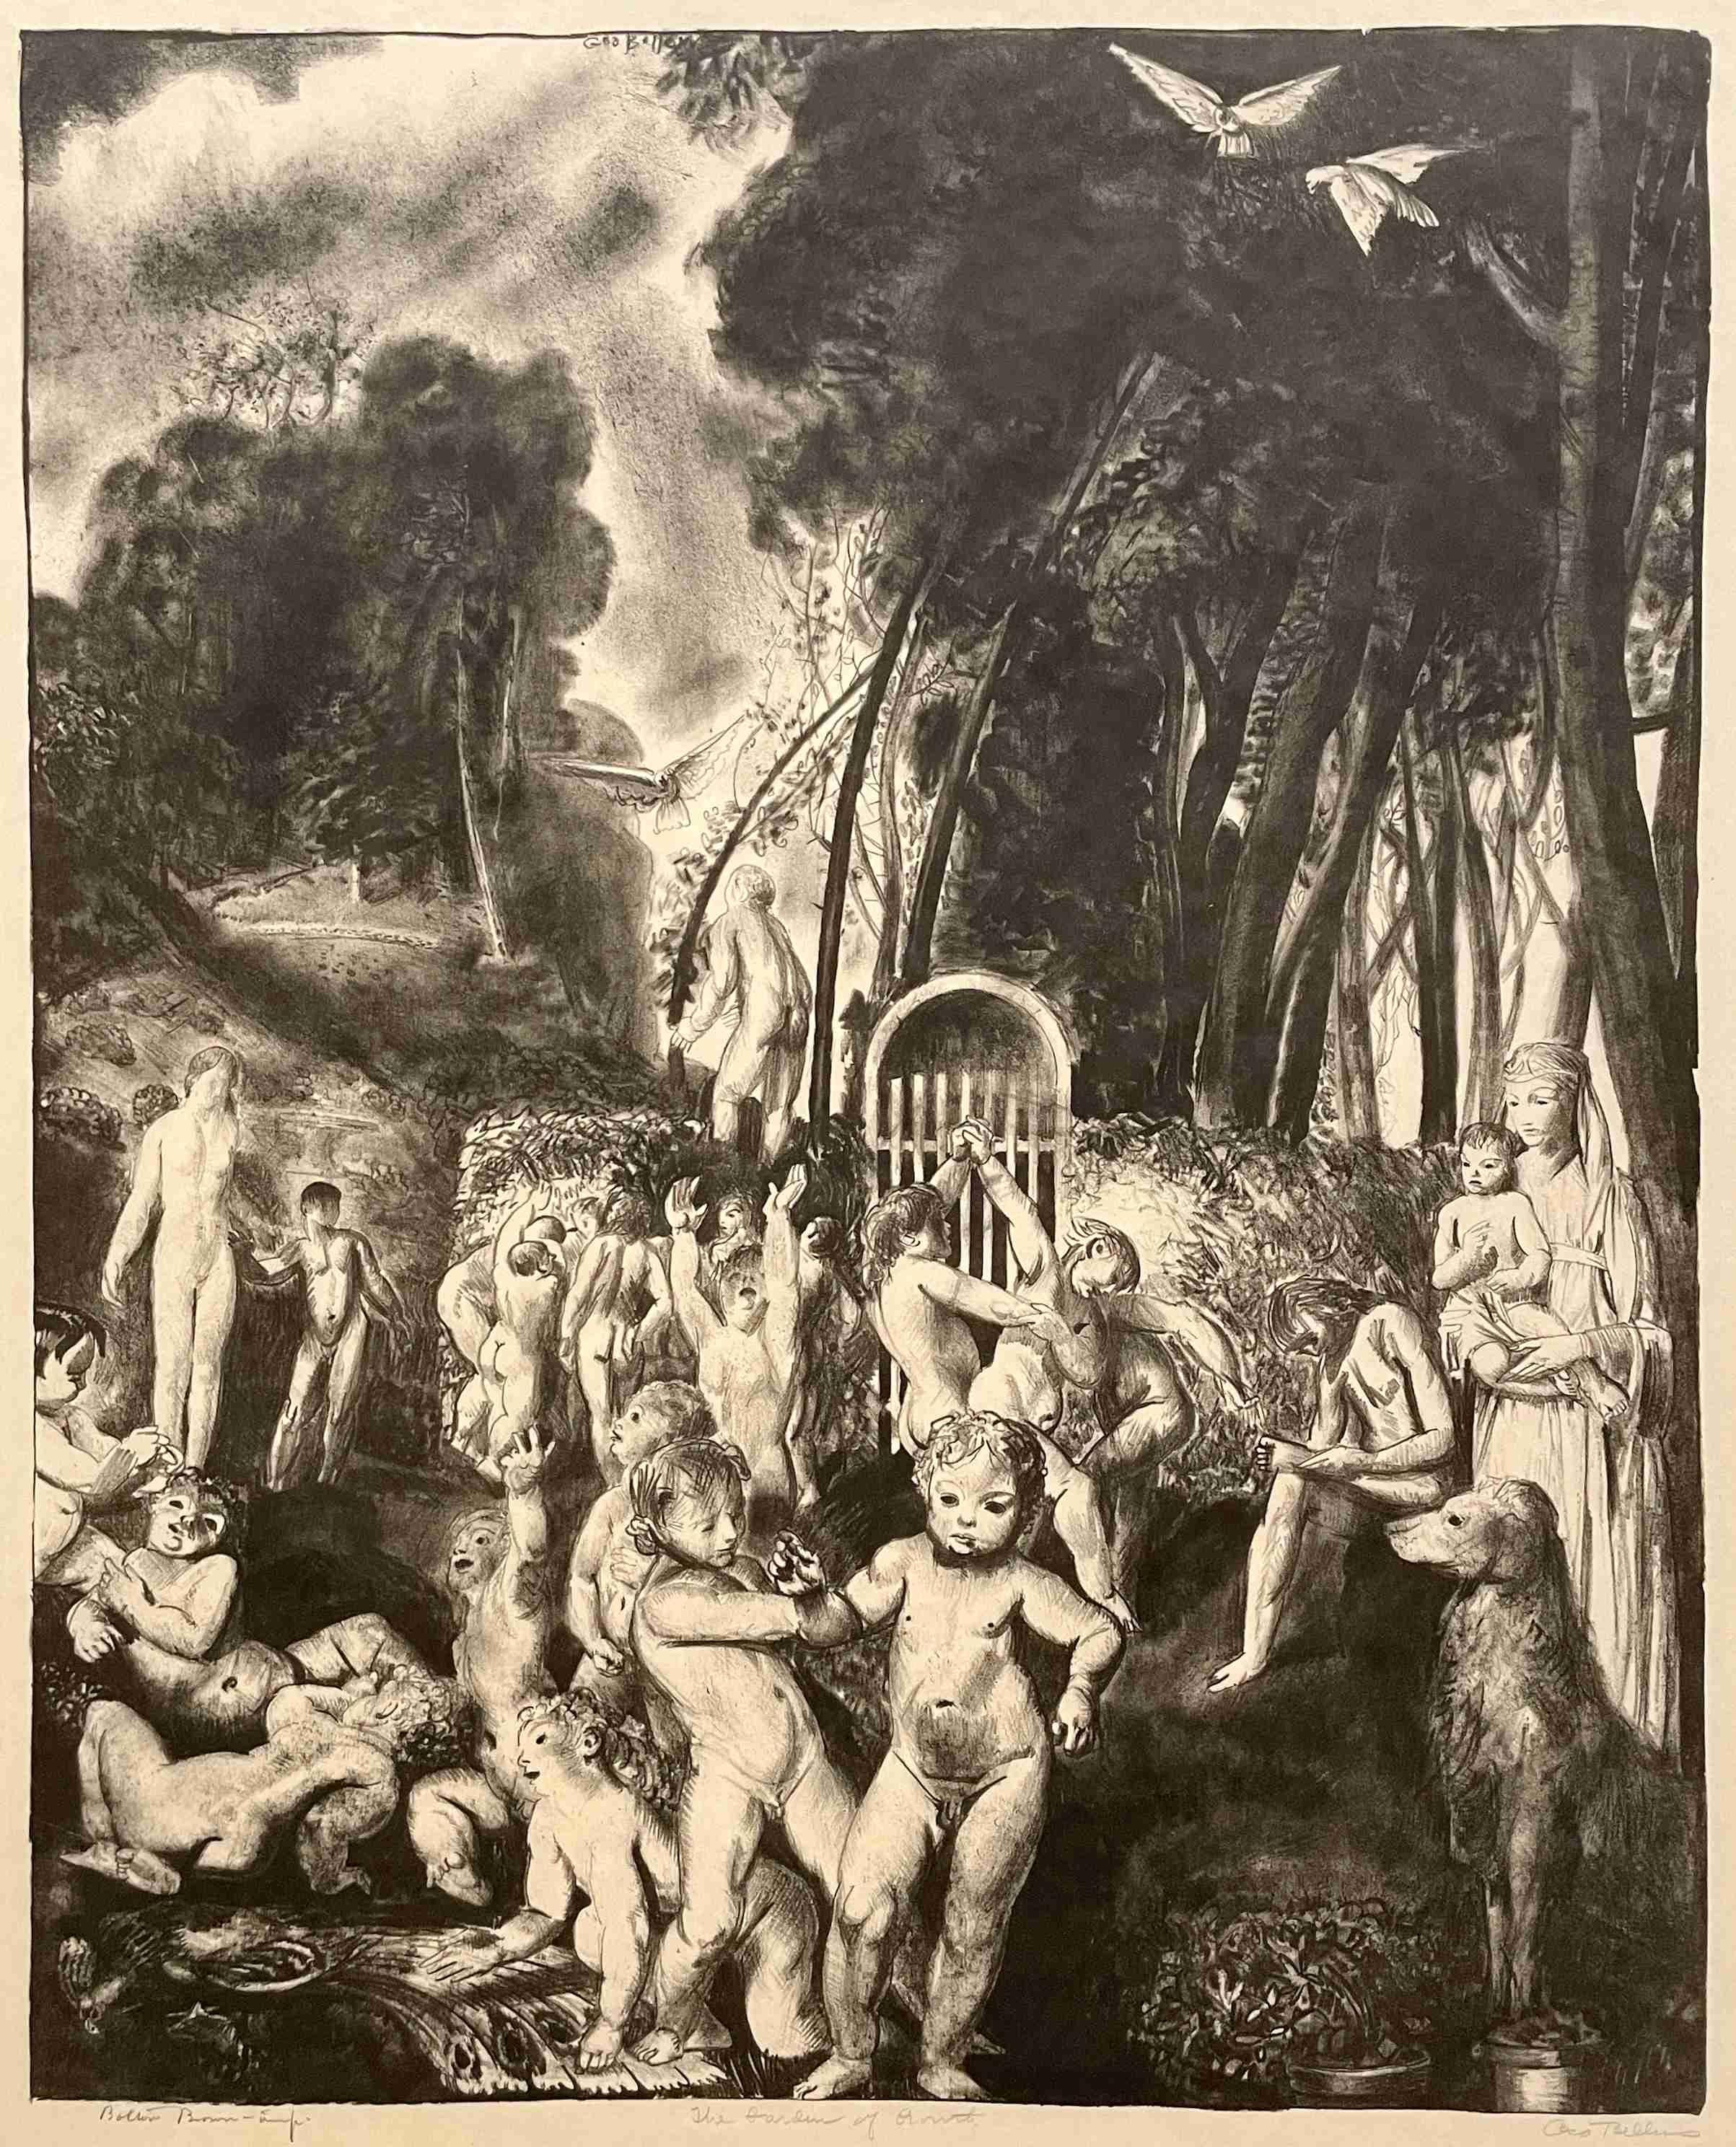 George Bellows Figurative Print - The Garden of Growth,  from the “Men Like Gods” Series